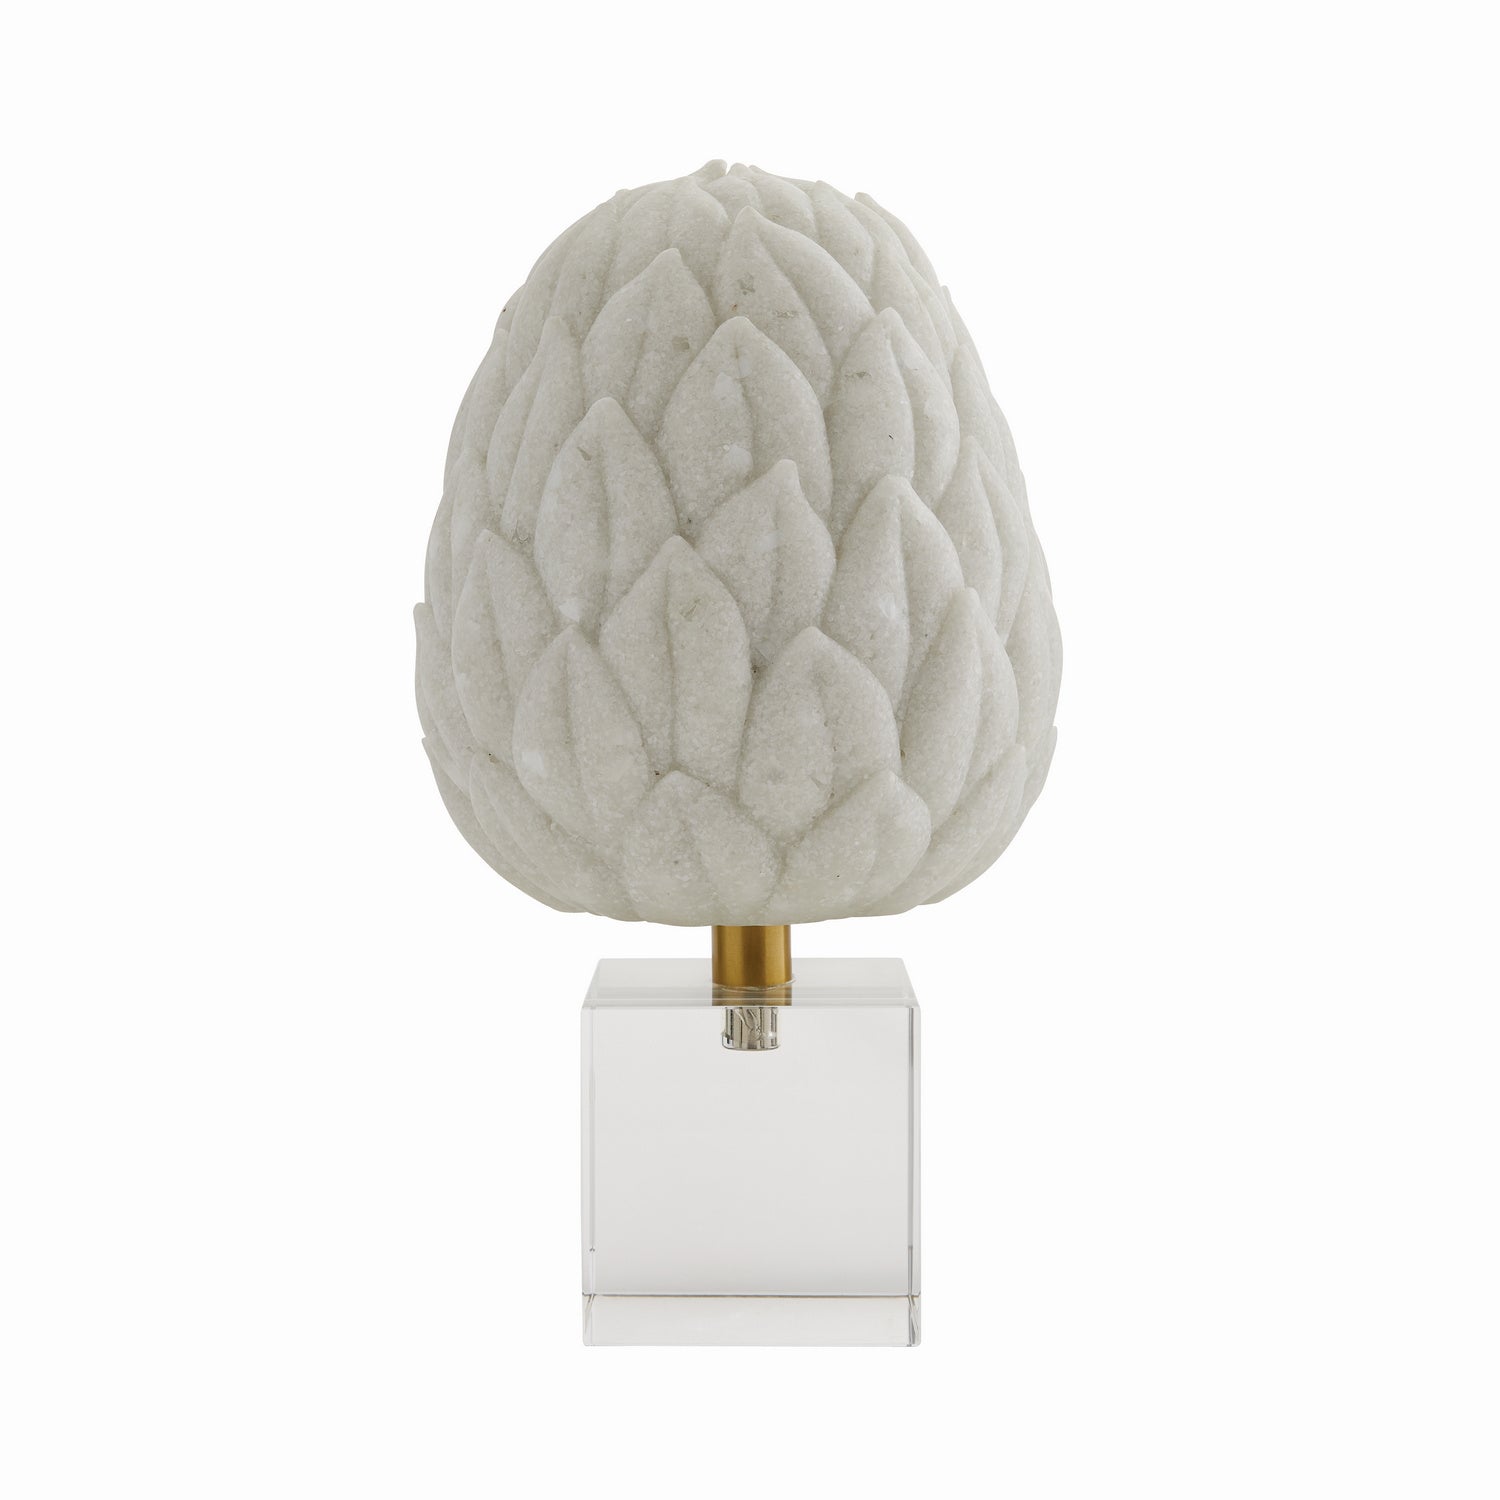 Sculpture from the Mirabelle collection in Ivory finish